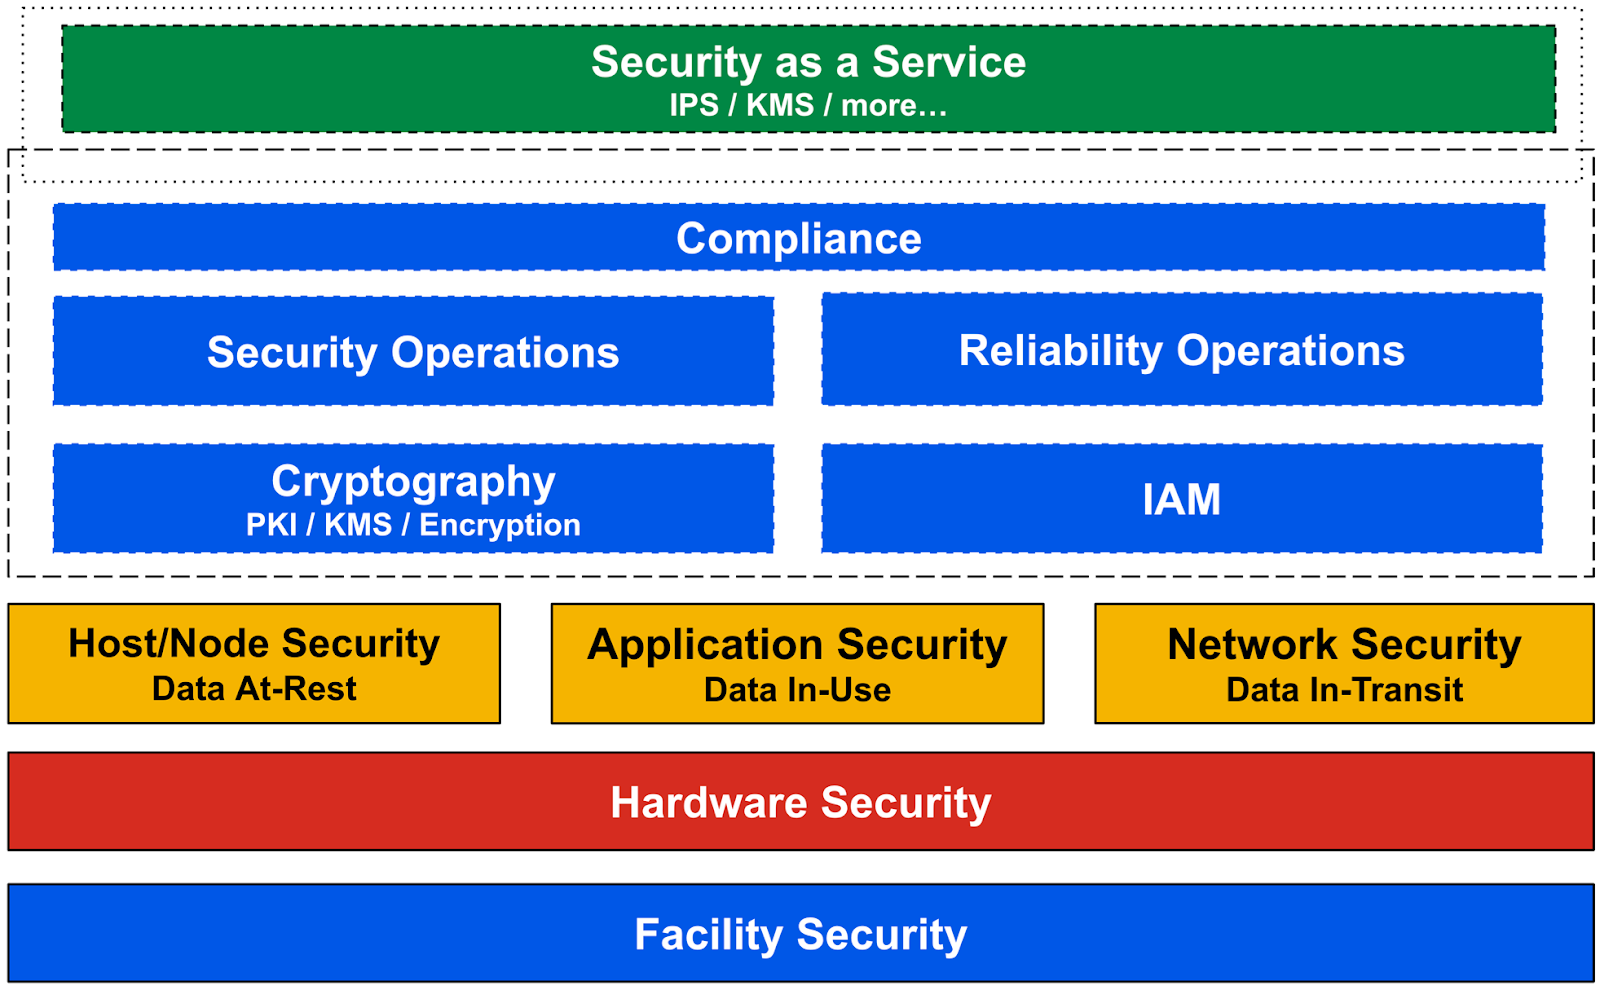 Components that make up GDC security as a service, including compliance, hardware and facility.